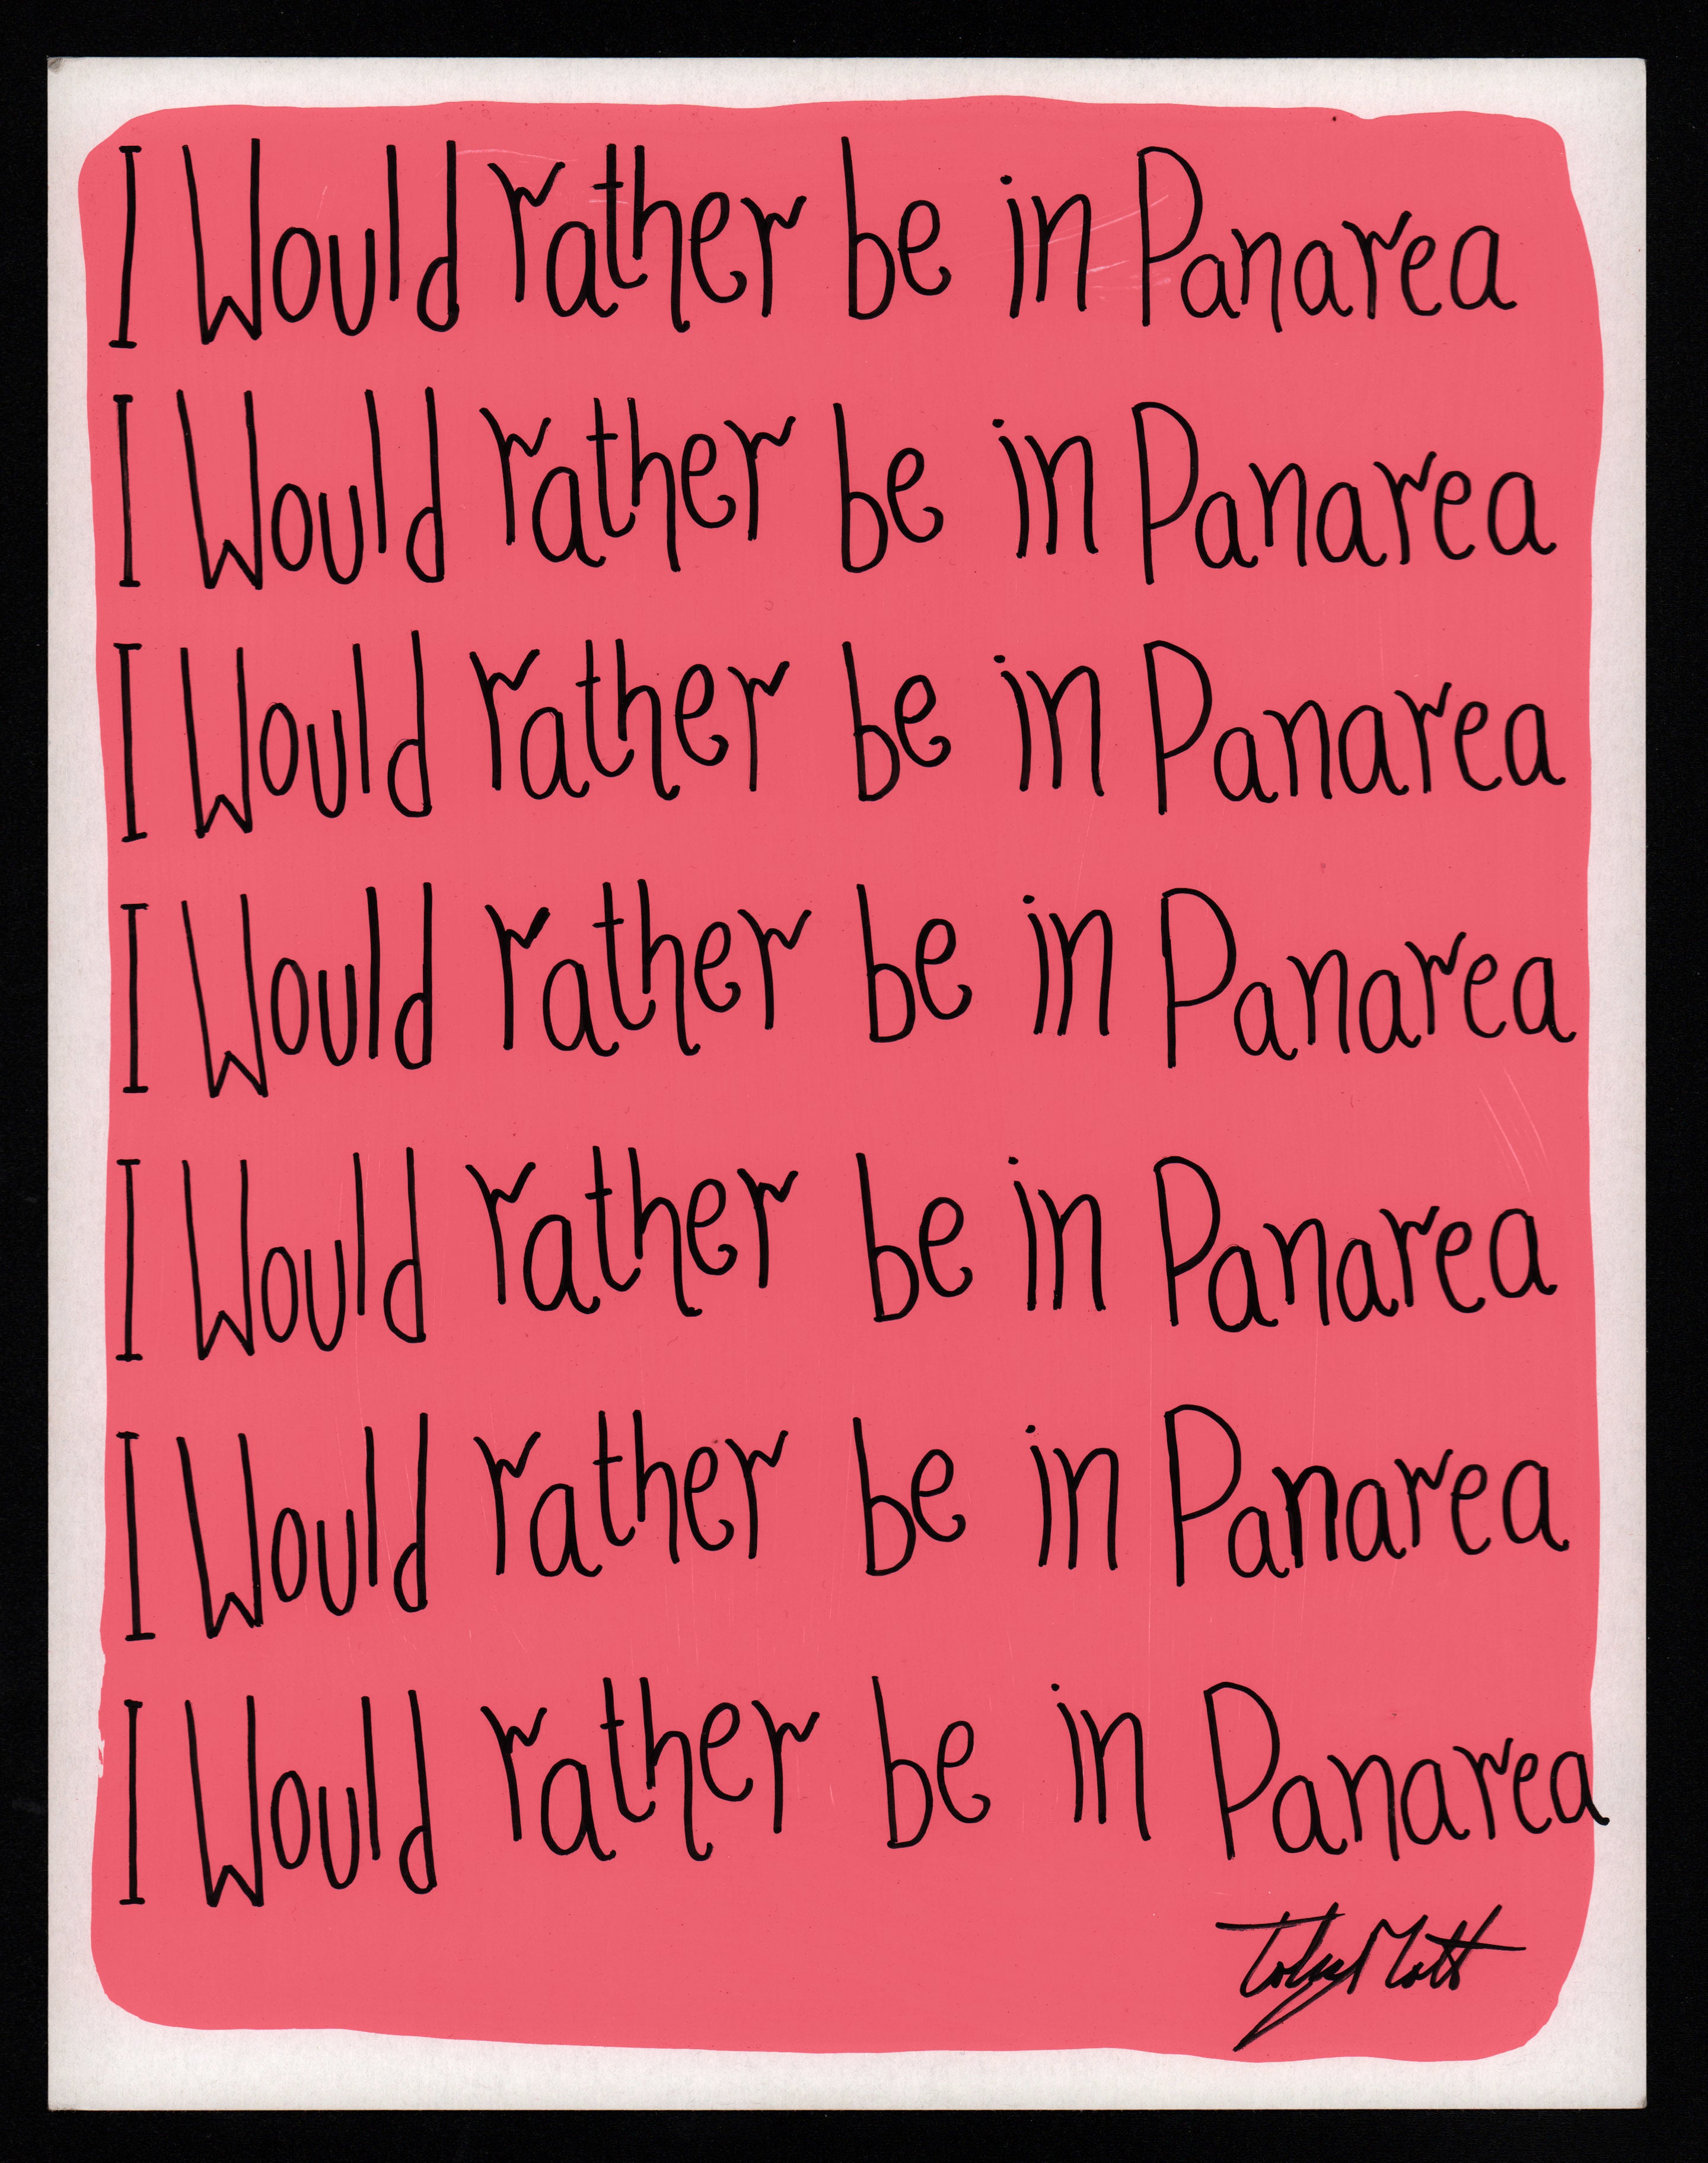 I would rather be in Panarea